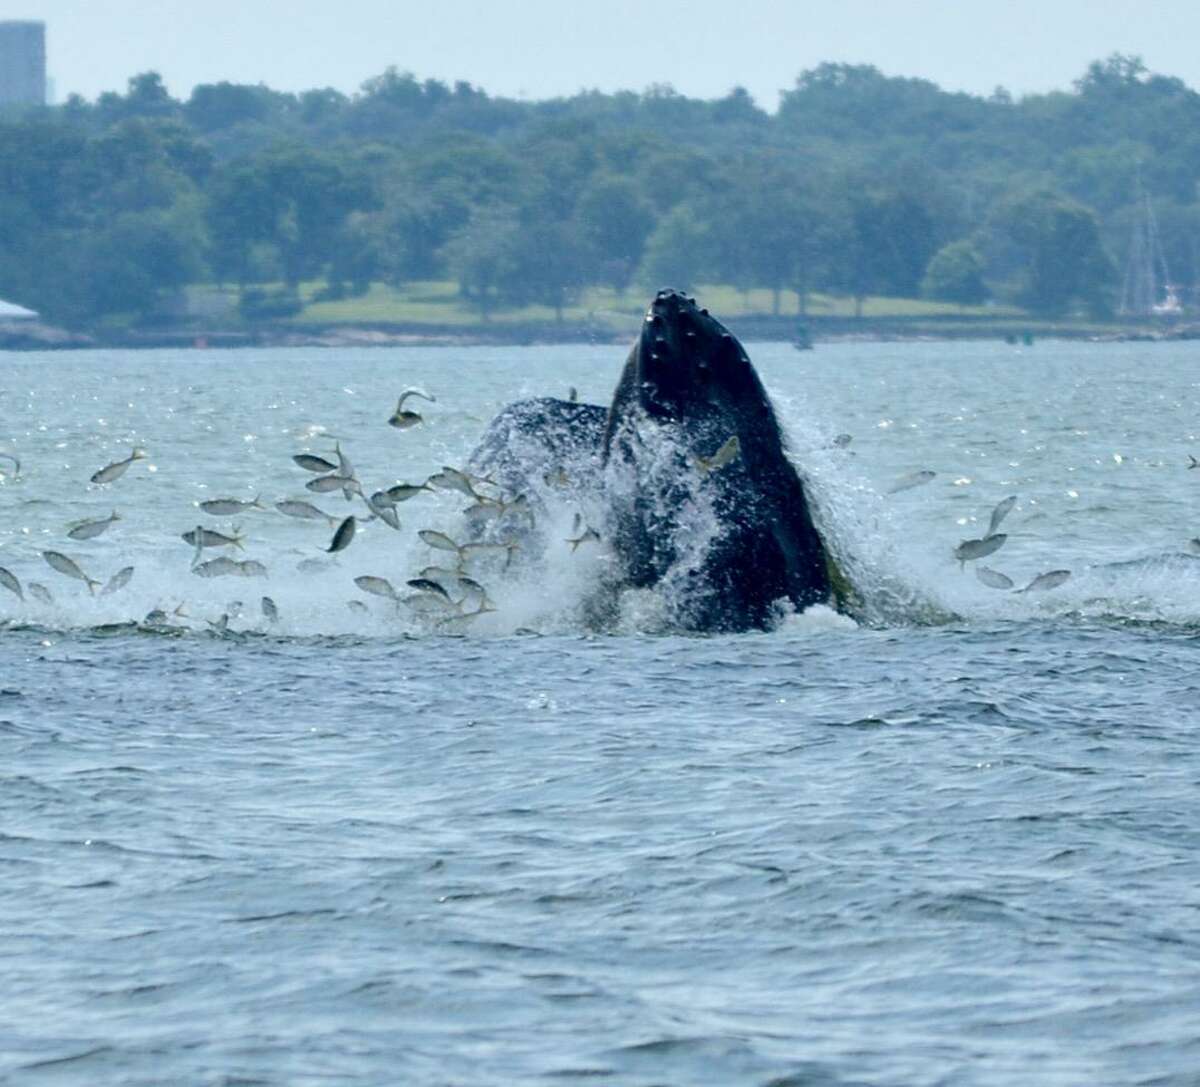 Humpback whales have been spotted in Long Island Sound near Norwalk, Greenwich and New Rochelle.